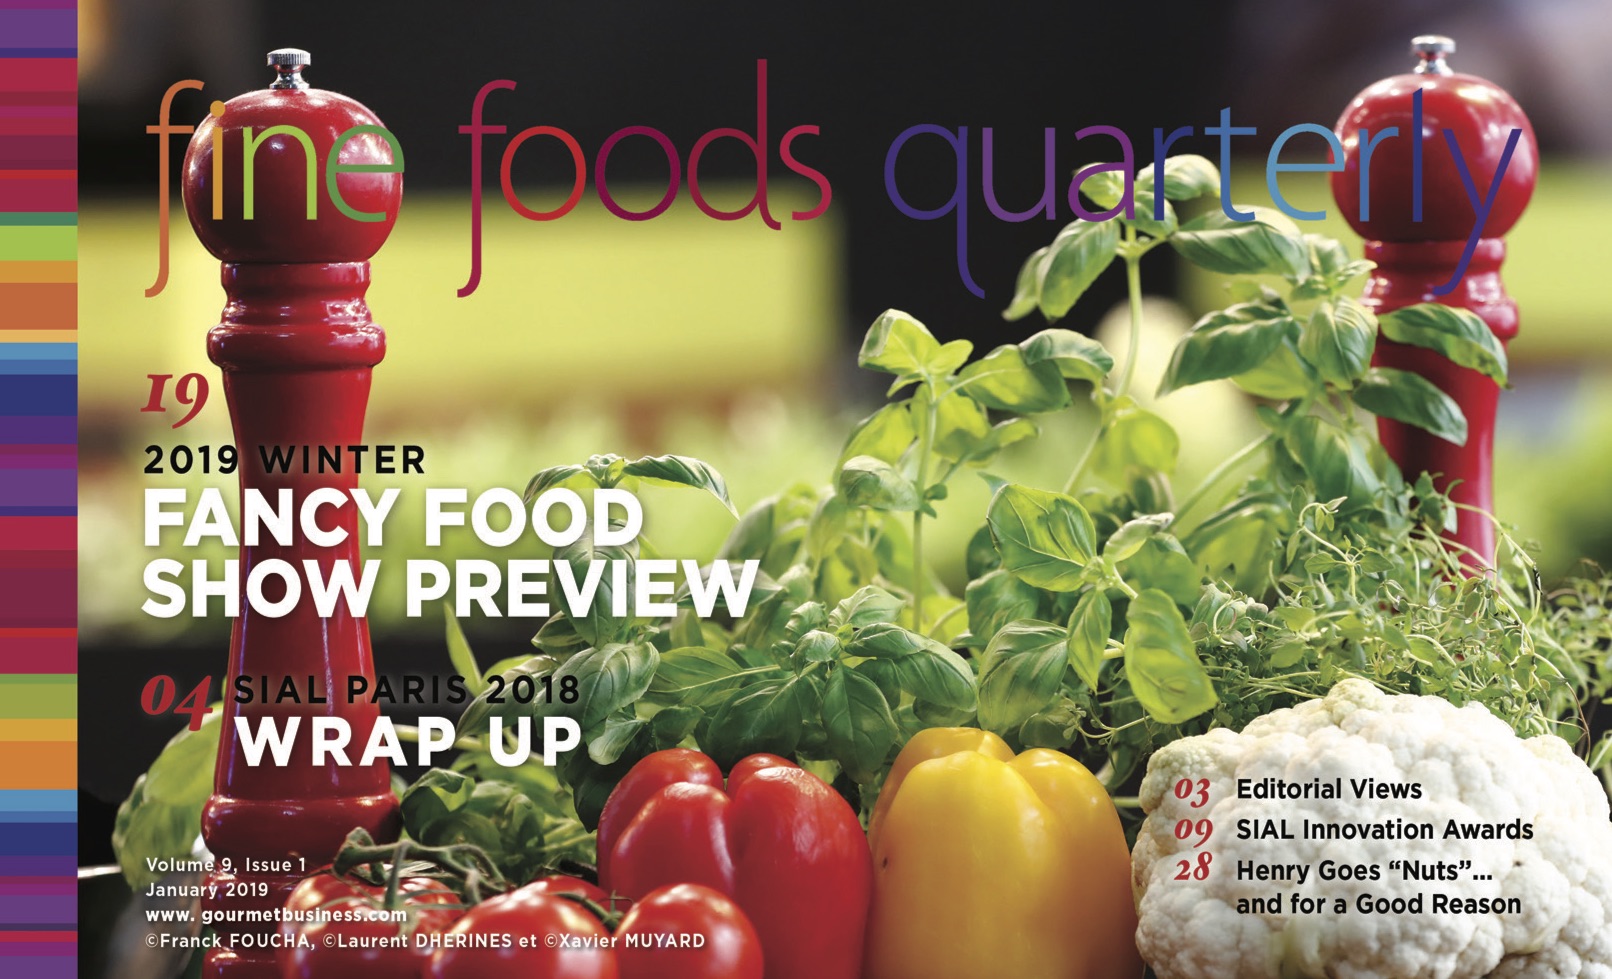 Fine Foods Quarterly Winter Fancy Food Show Preview '19